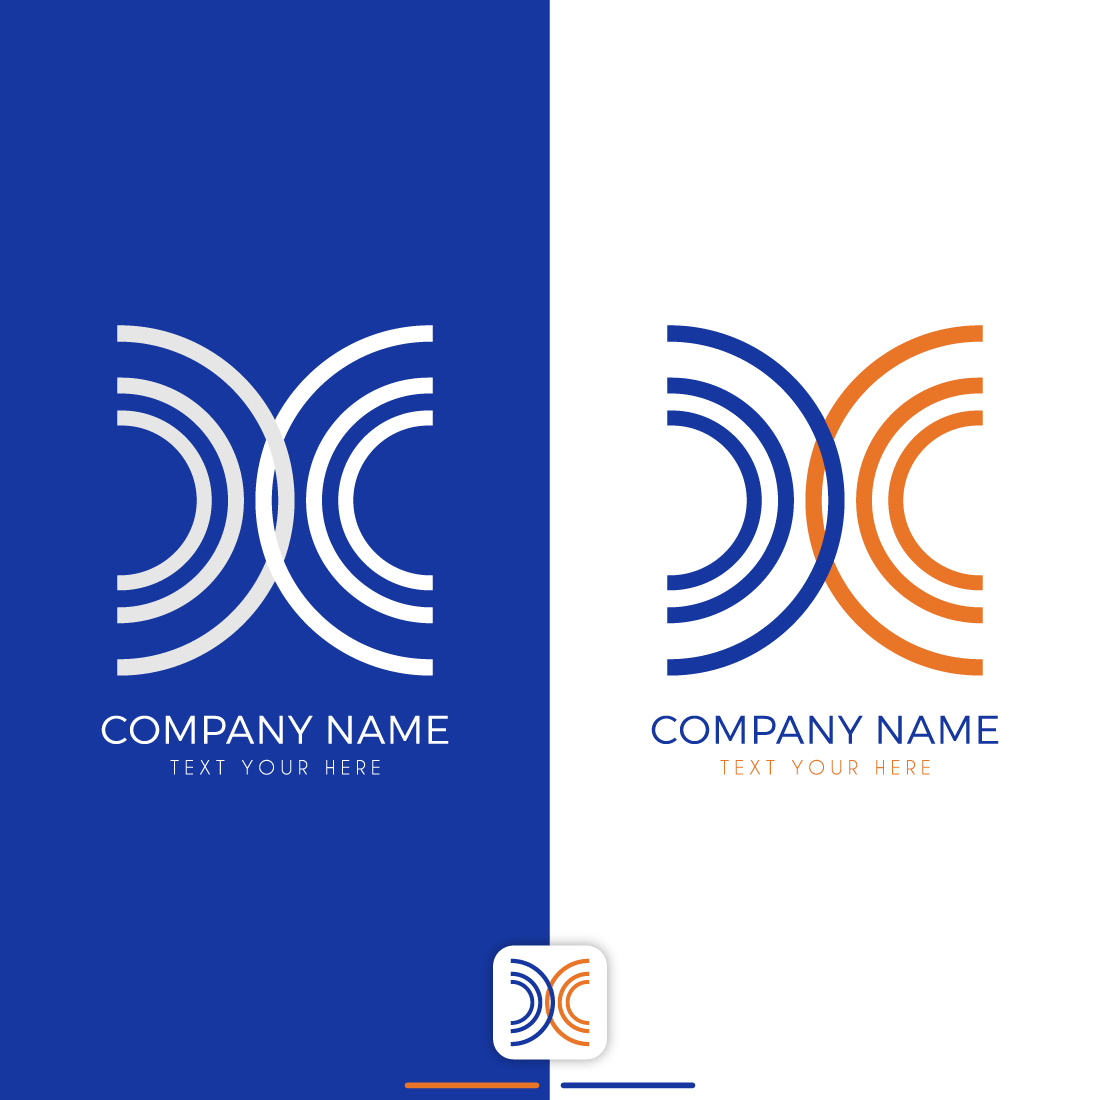 X Initial Letter Logo Design Template Vector main cover.